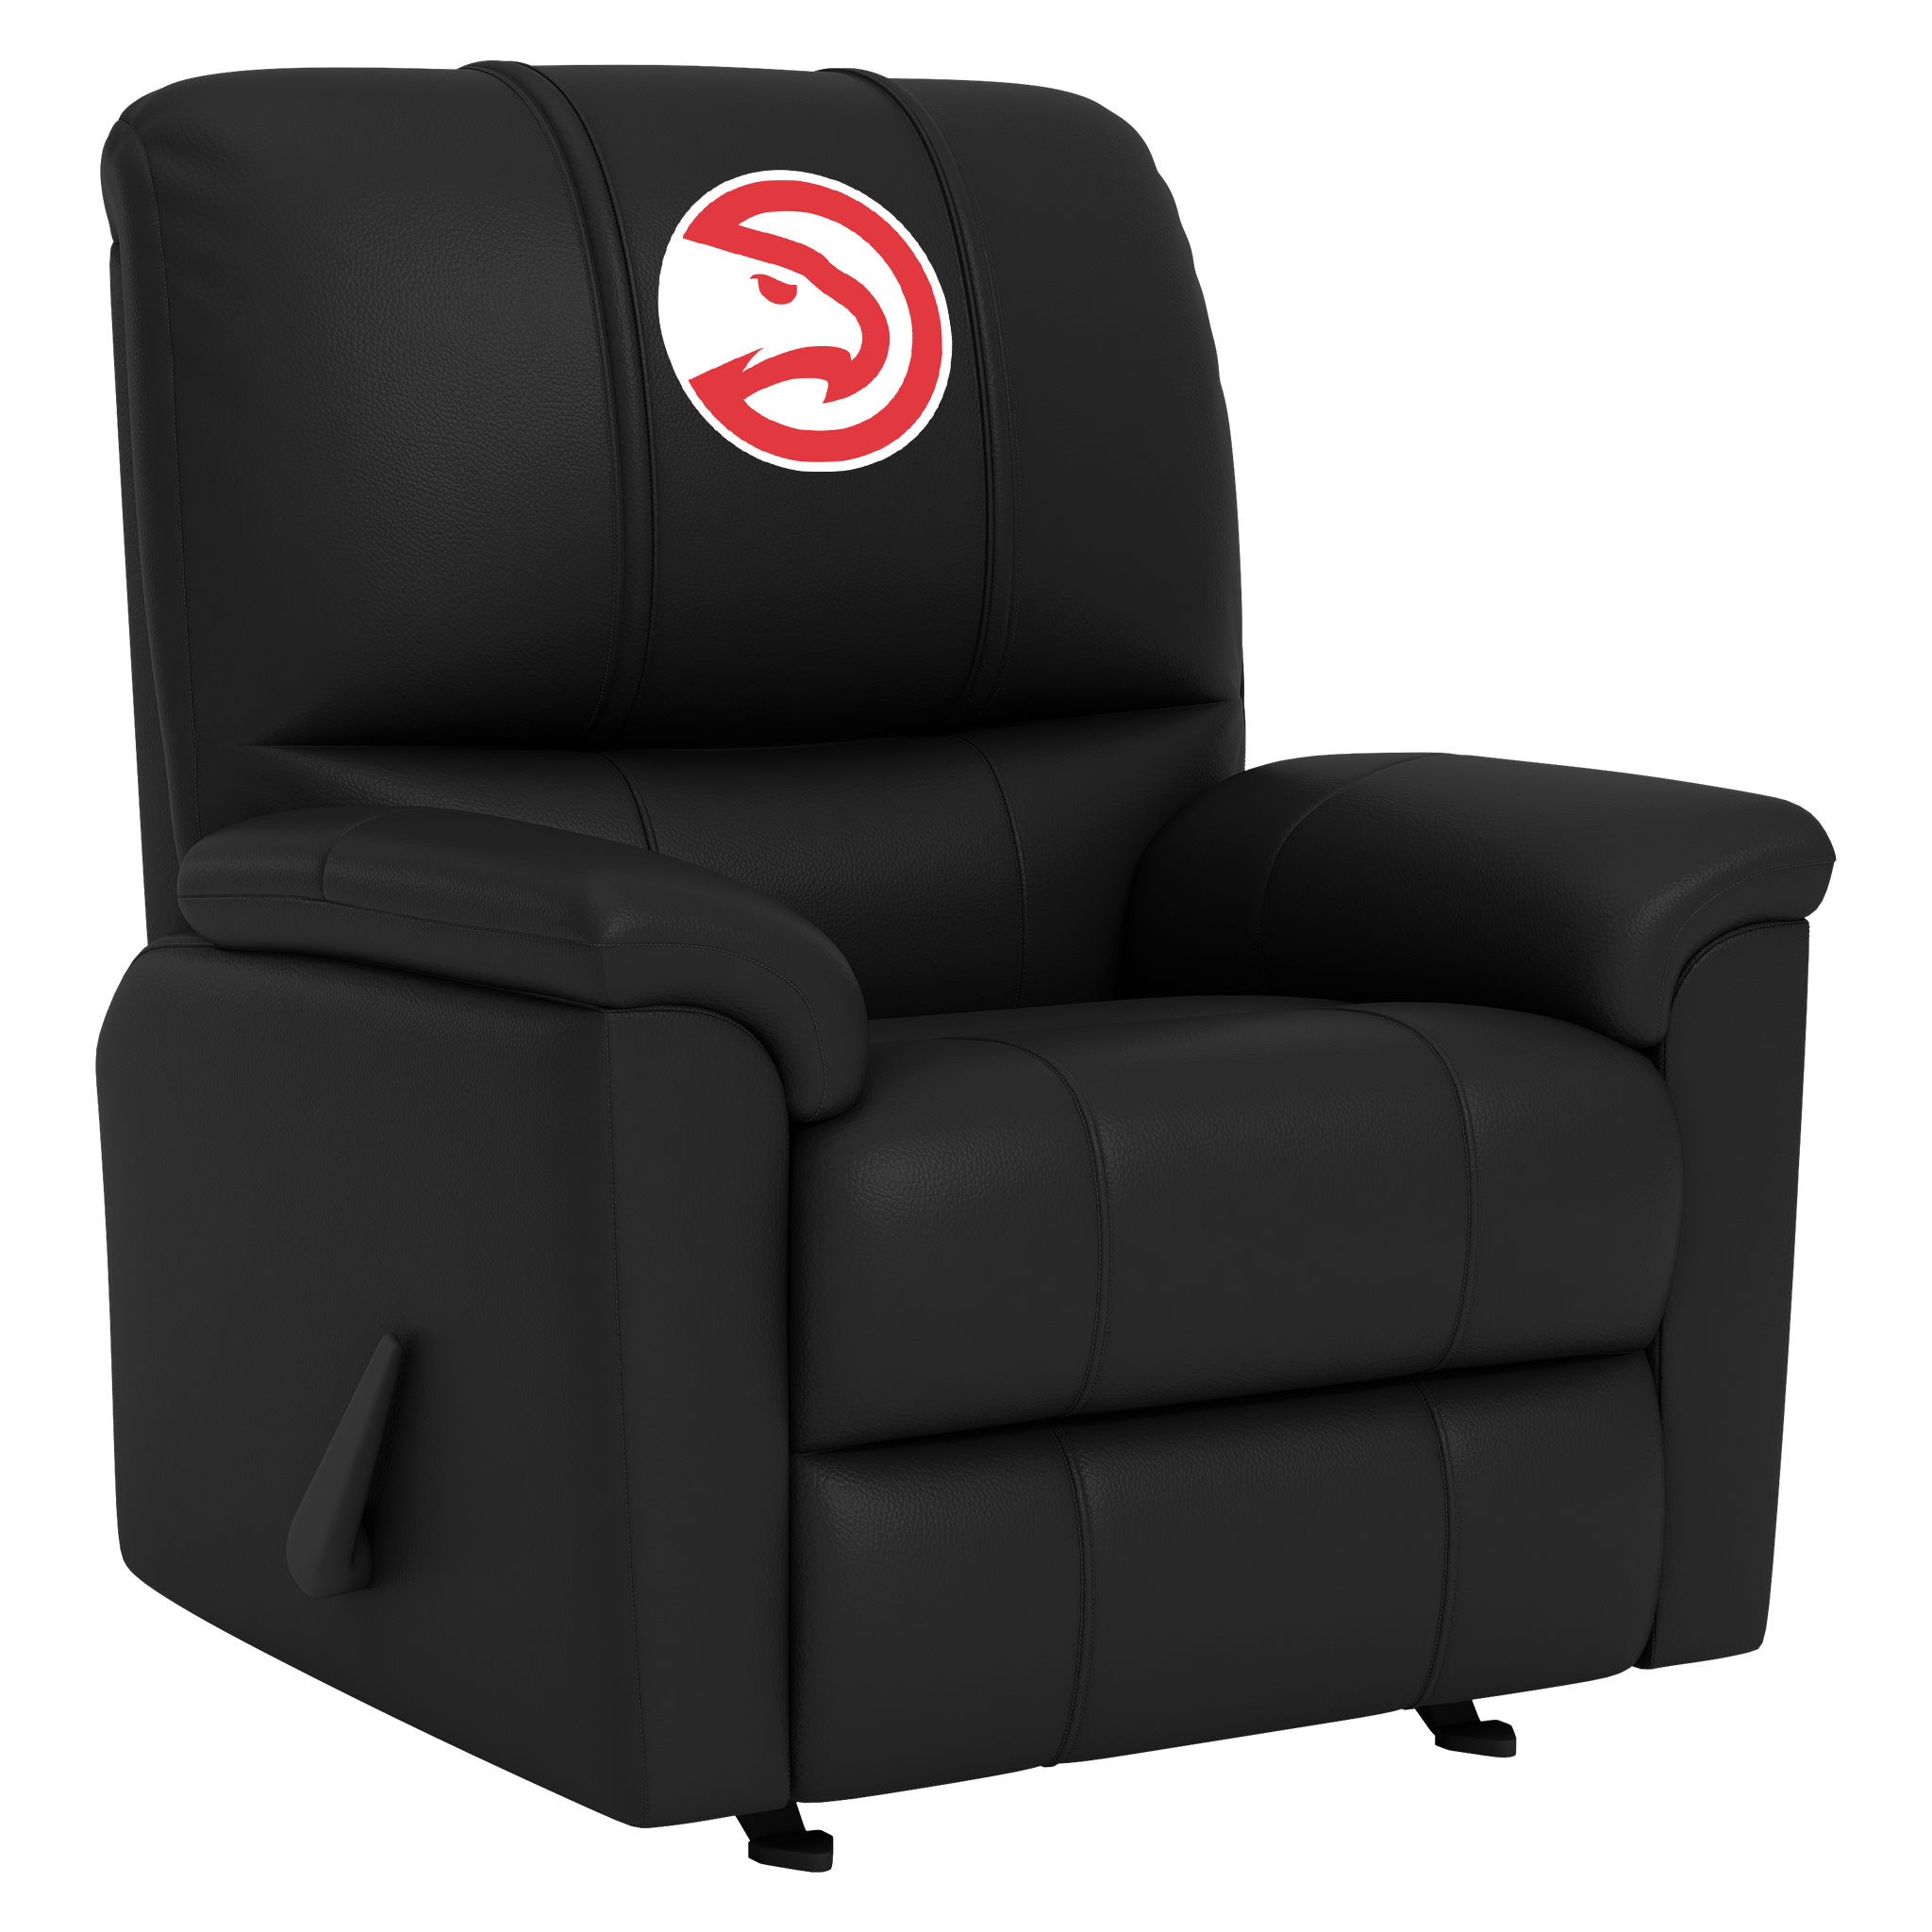 GMC Silver Club Chair with GMC Primary Logo